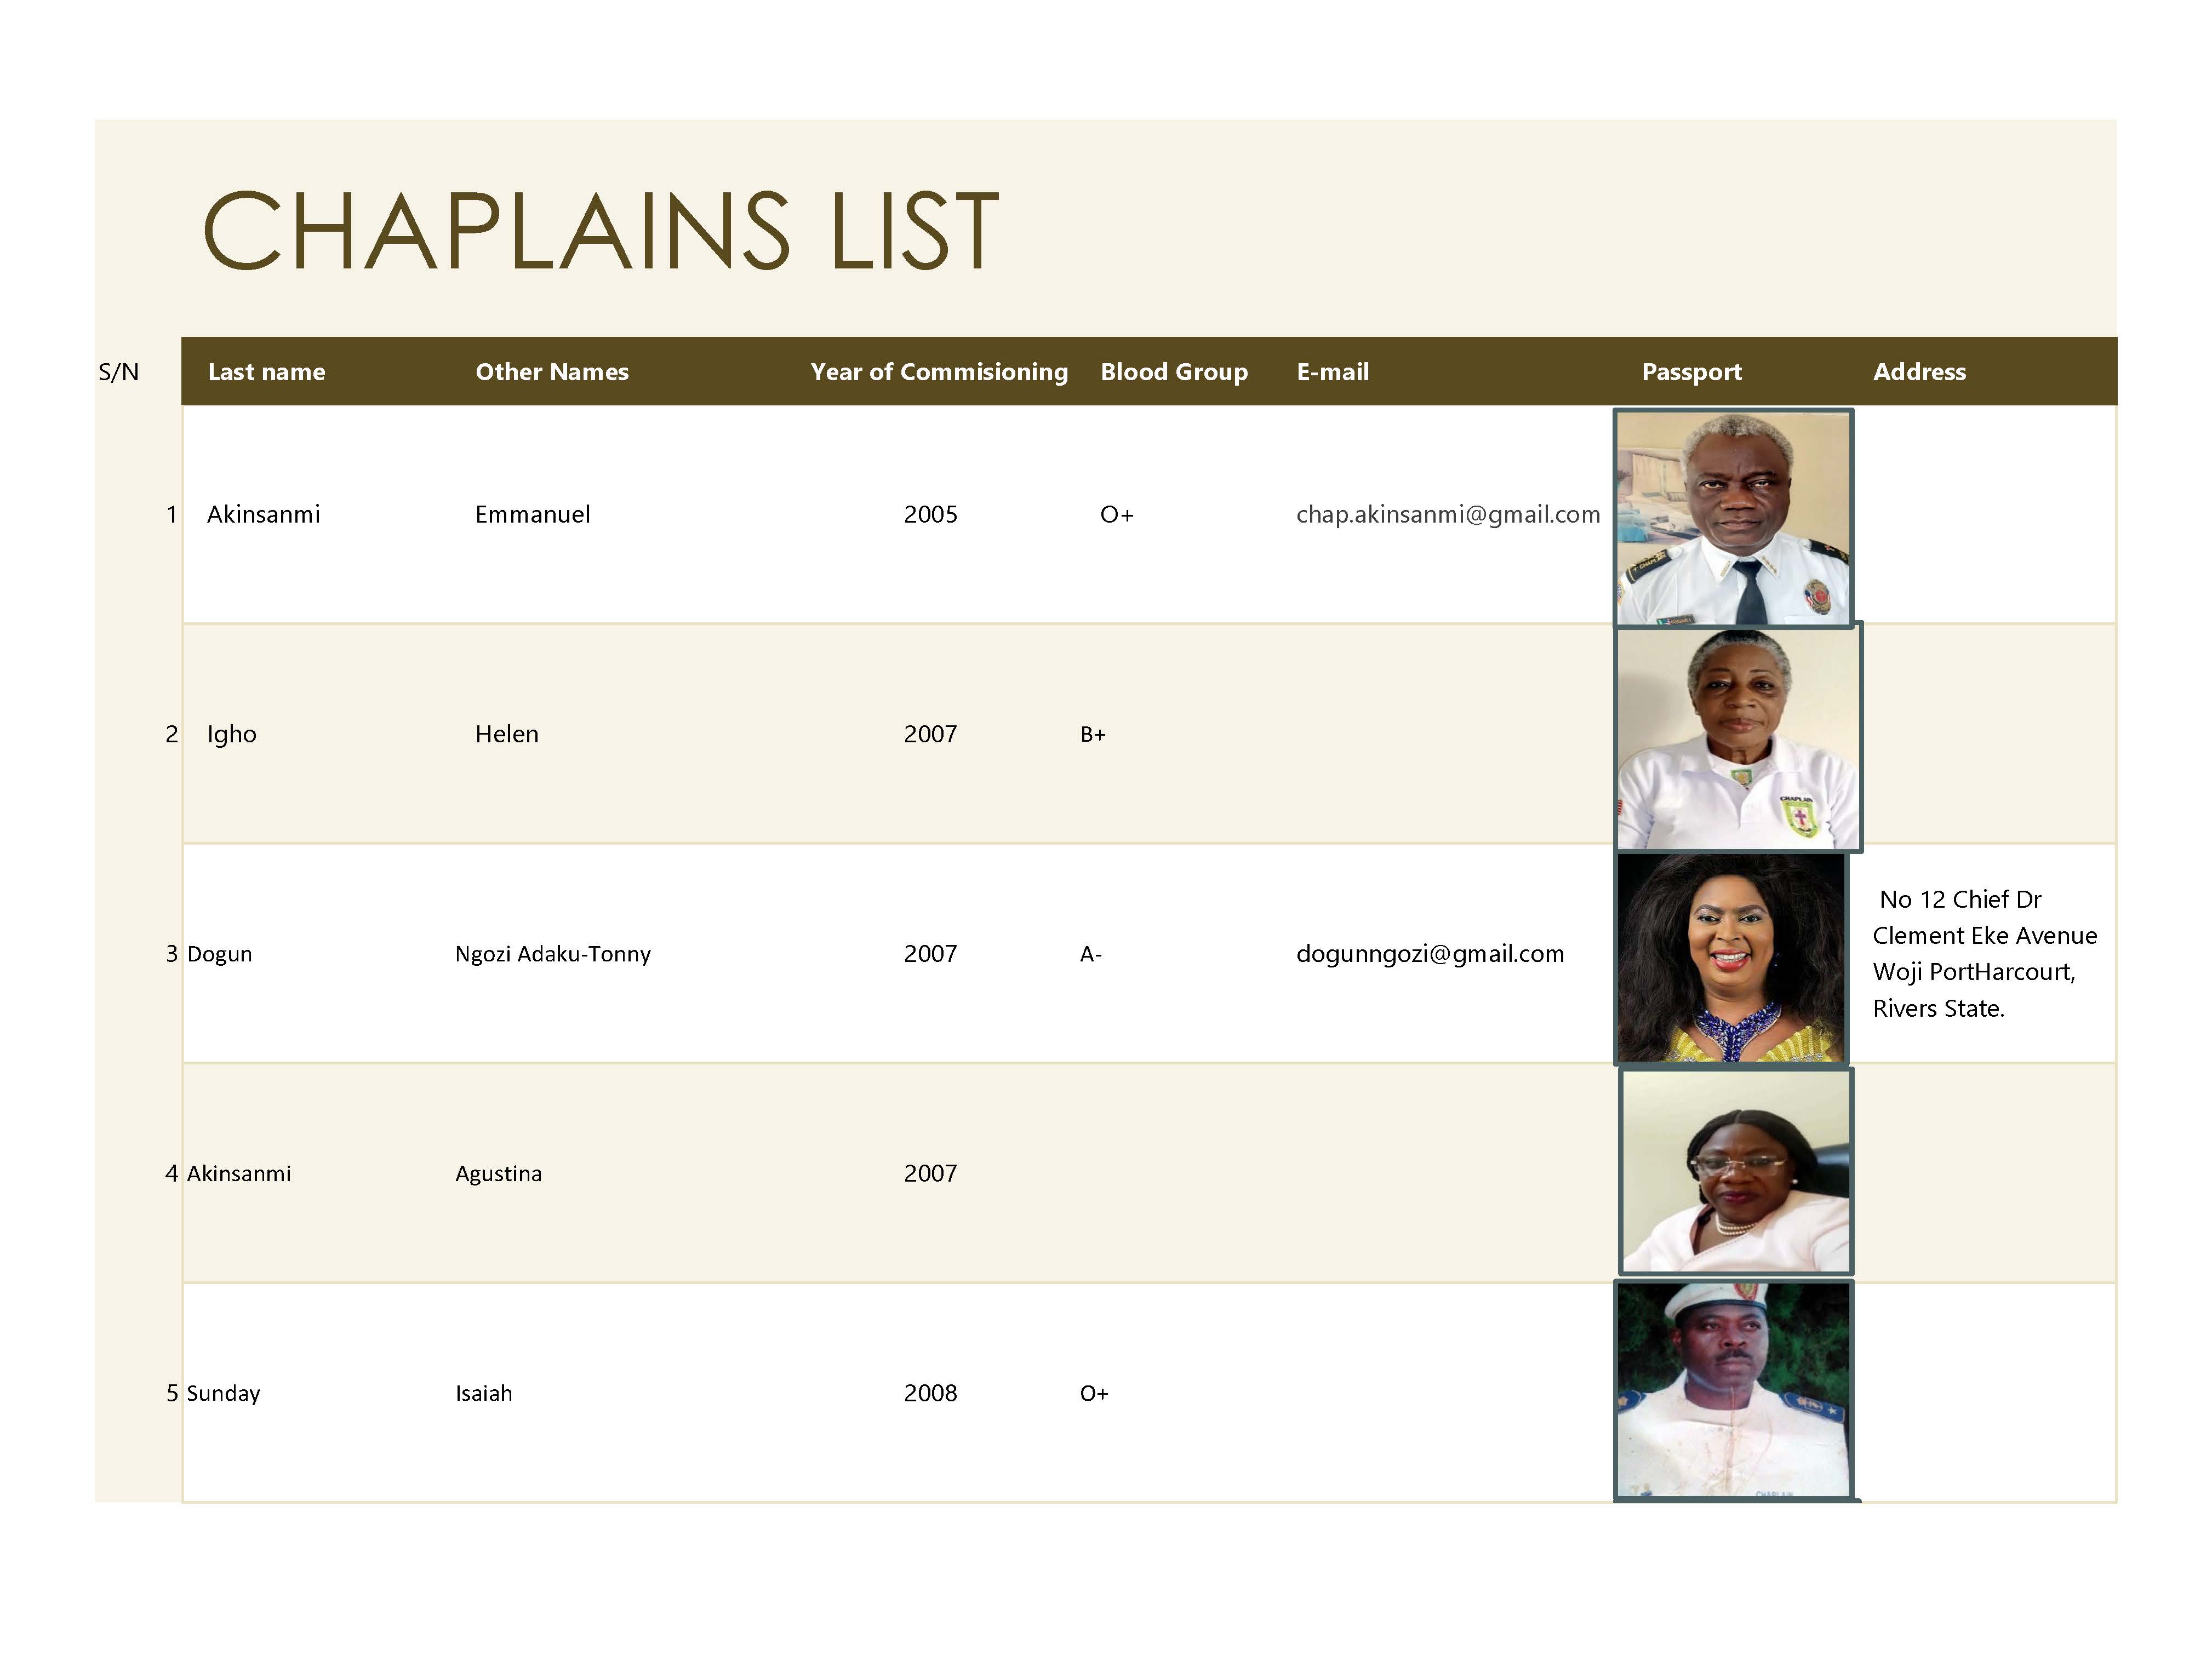 CHAPLAINS LIST Upgraded Page 01